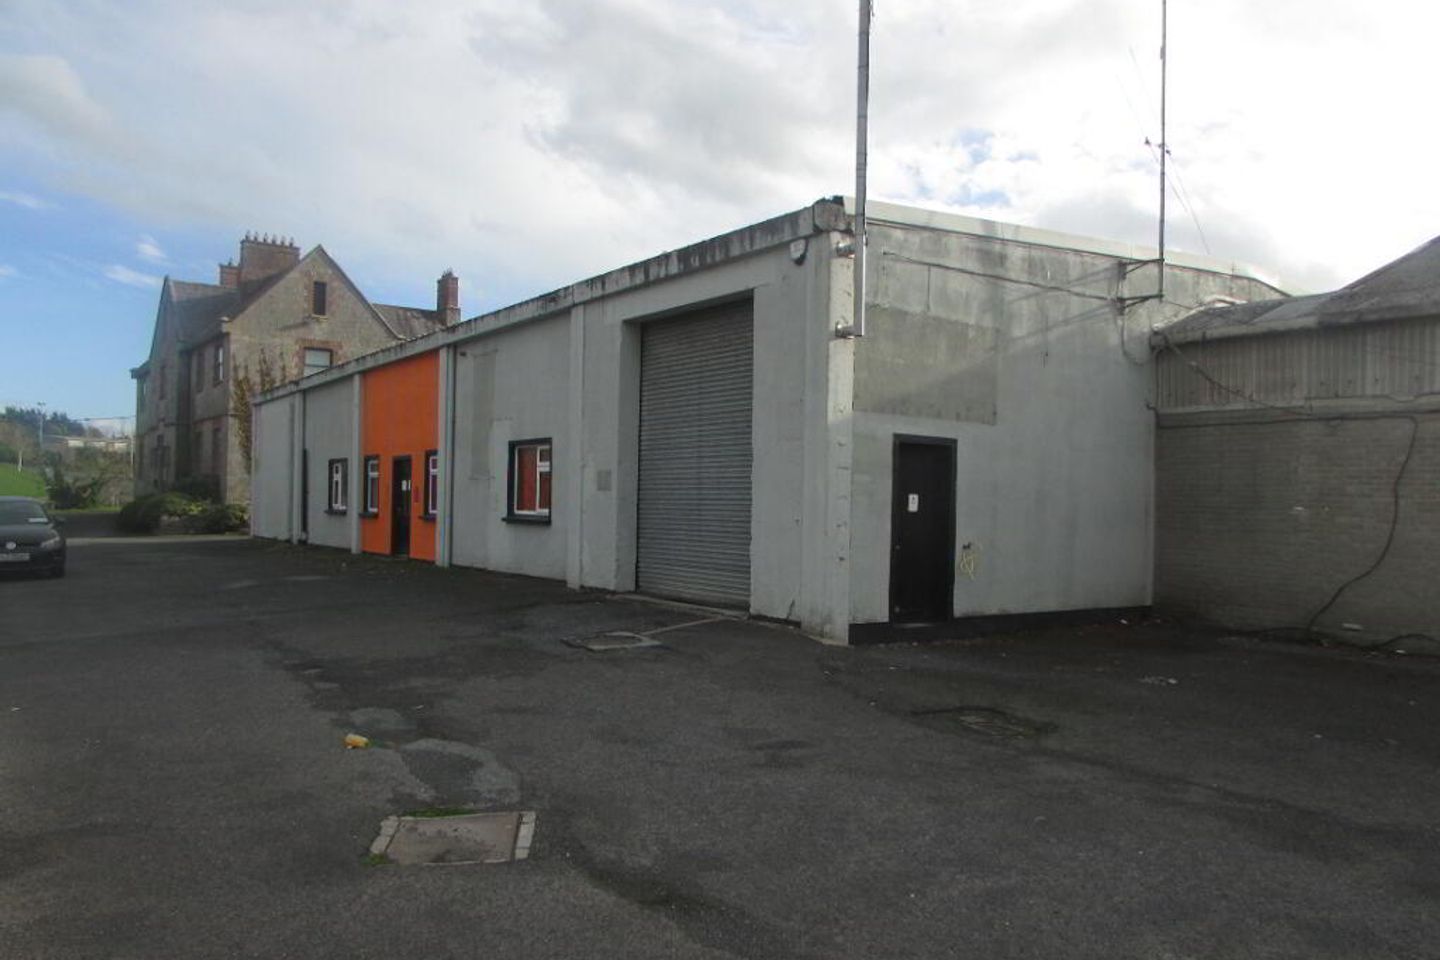 Shercock Road Warehouse With Office Section, Carrickmacross, Co. Monaghan